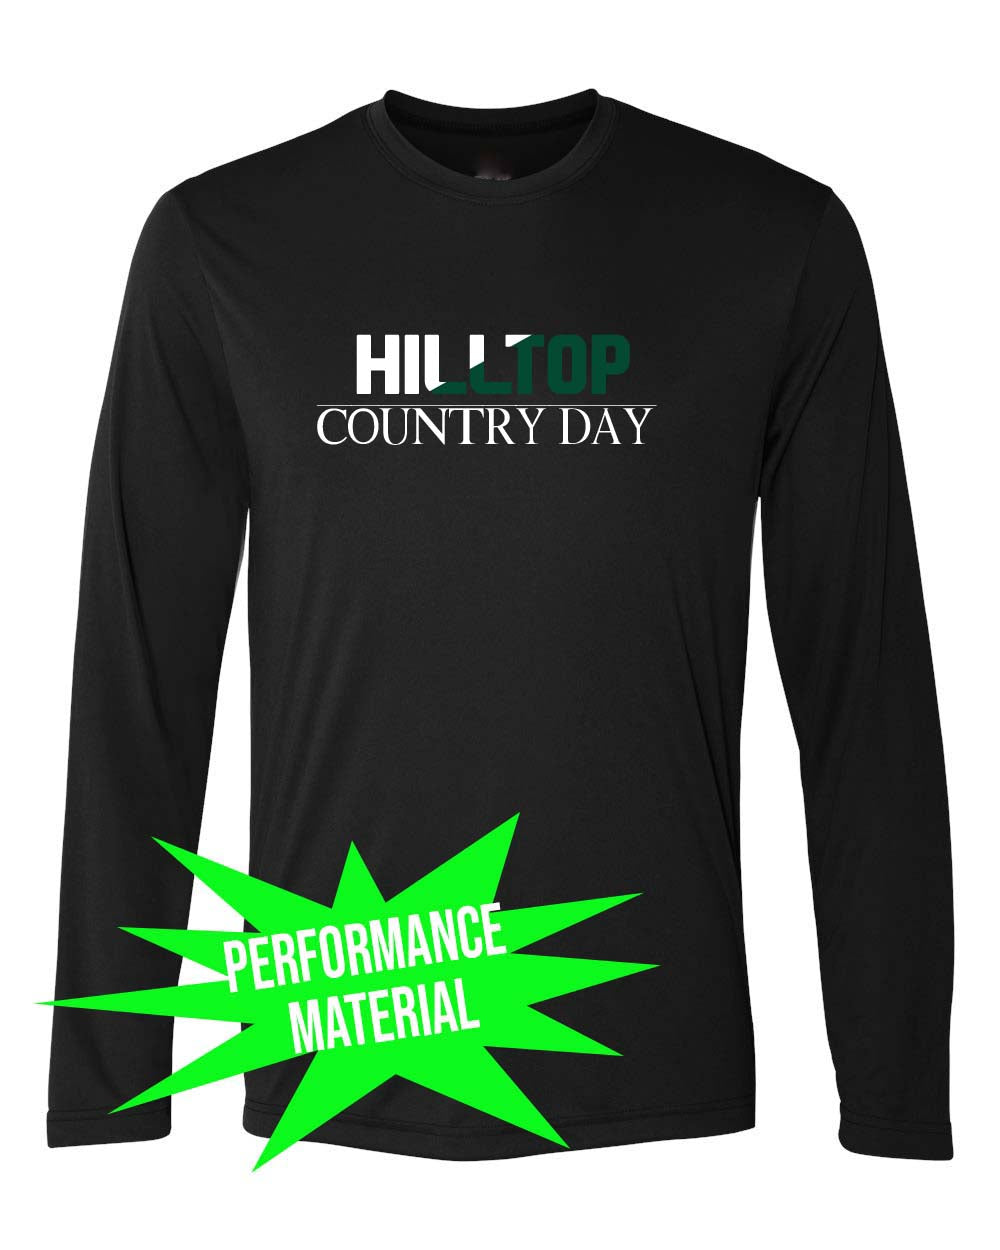 Hilltop Country Day School Performance Material Design 4 Long Sleeve Shirt